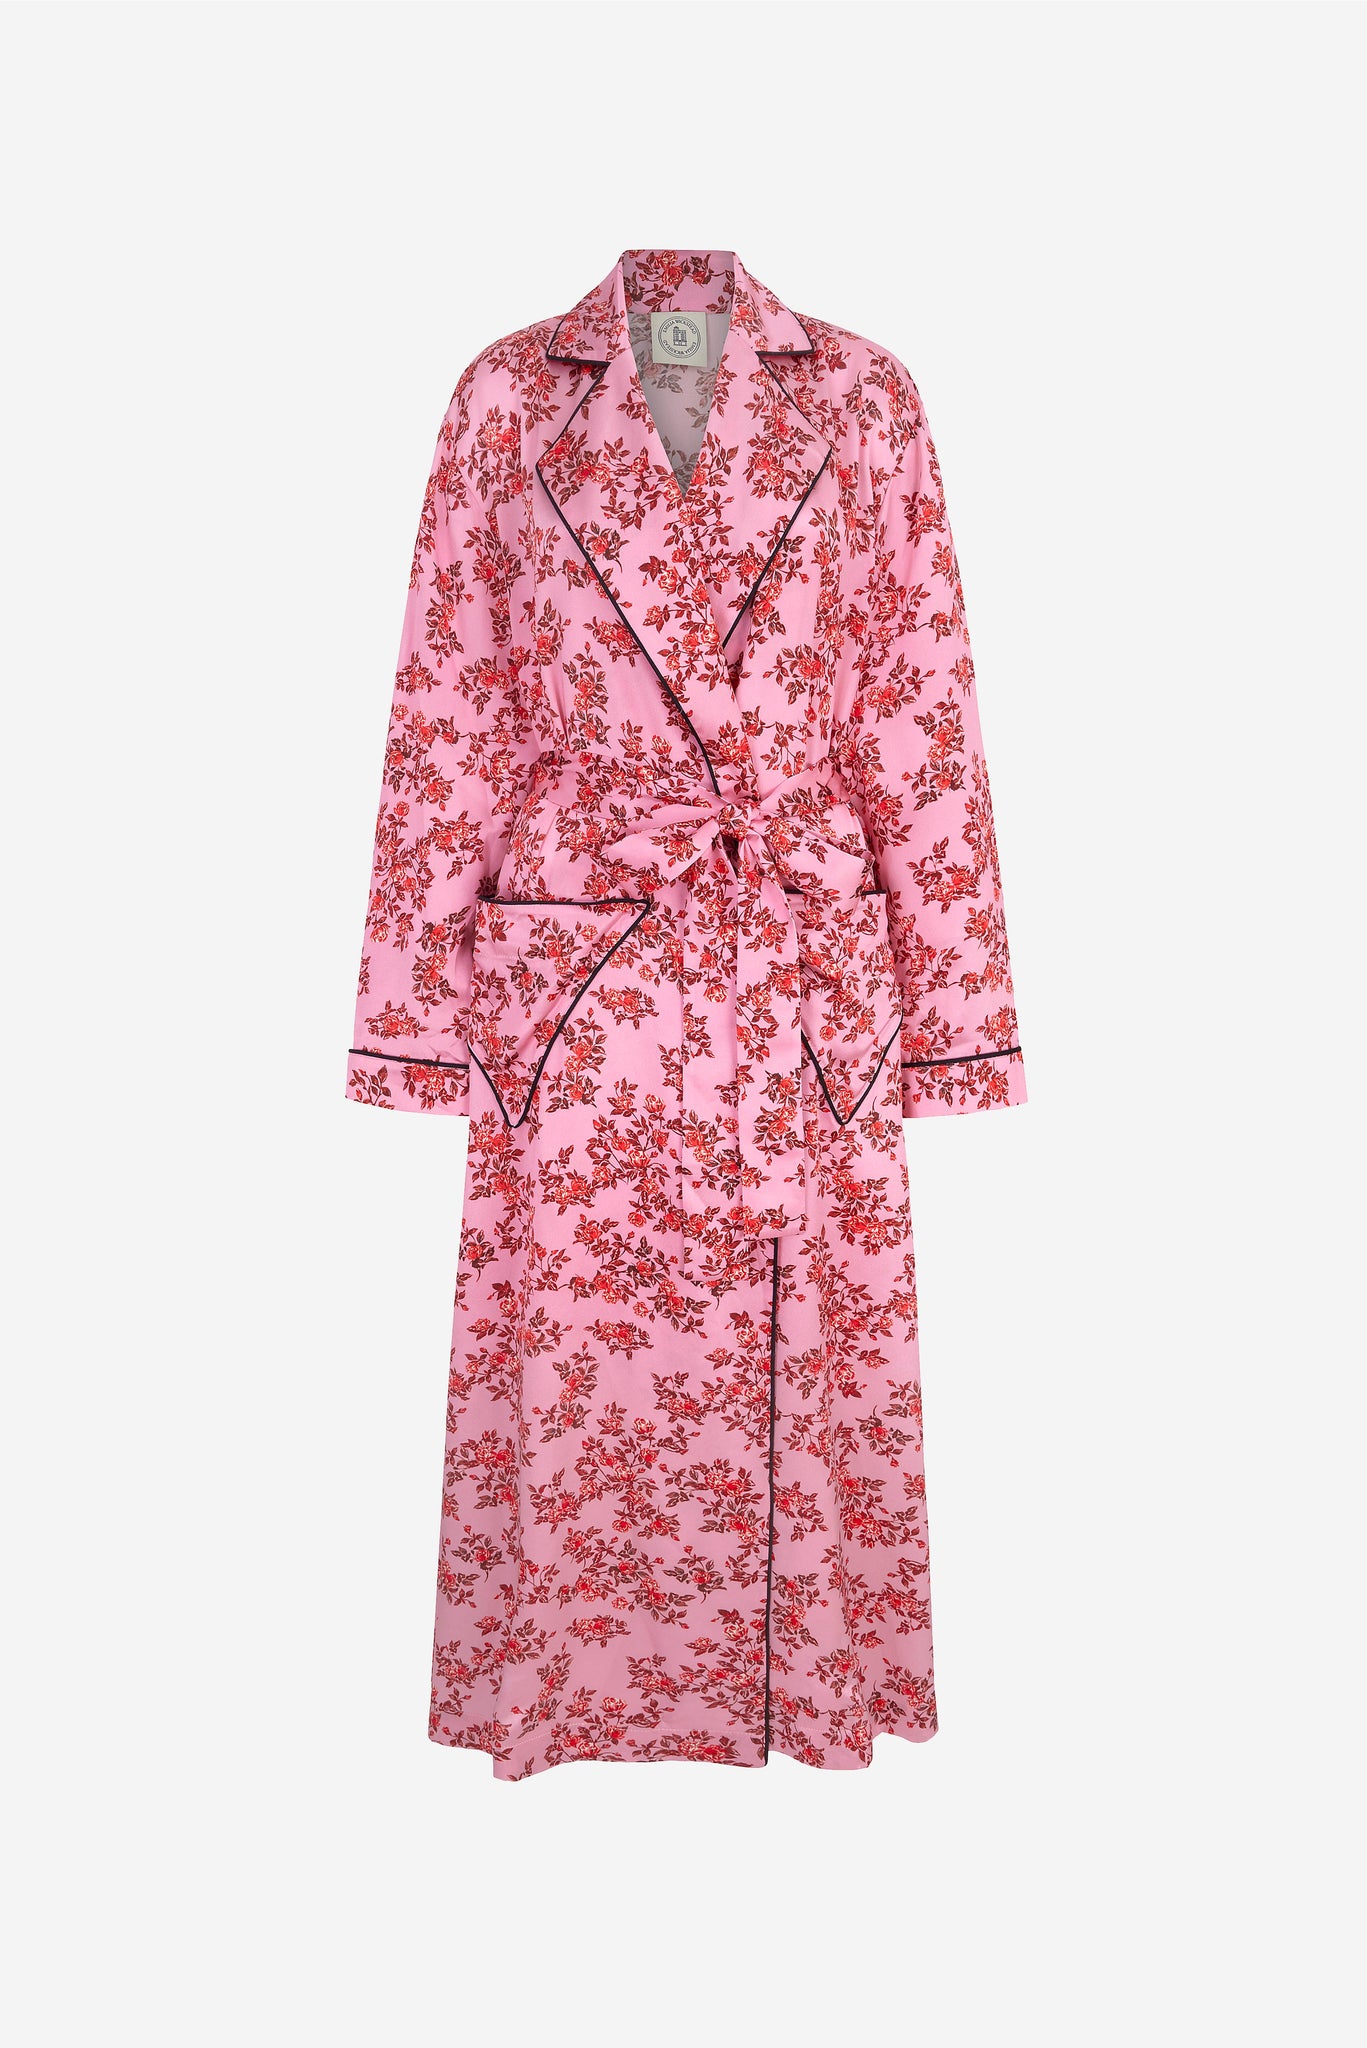 Amana Dressing Gown in Red Roses On Pink Silk Satin | Emilia Wickstead